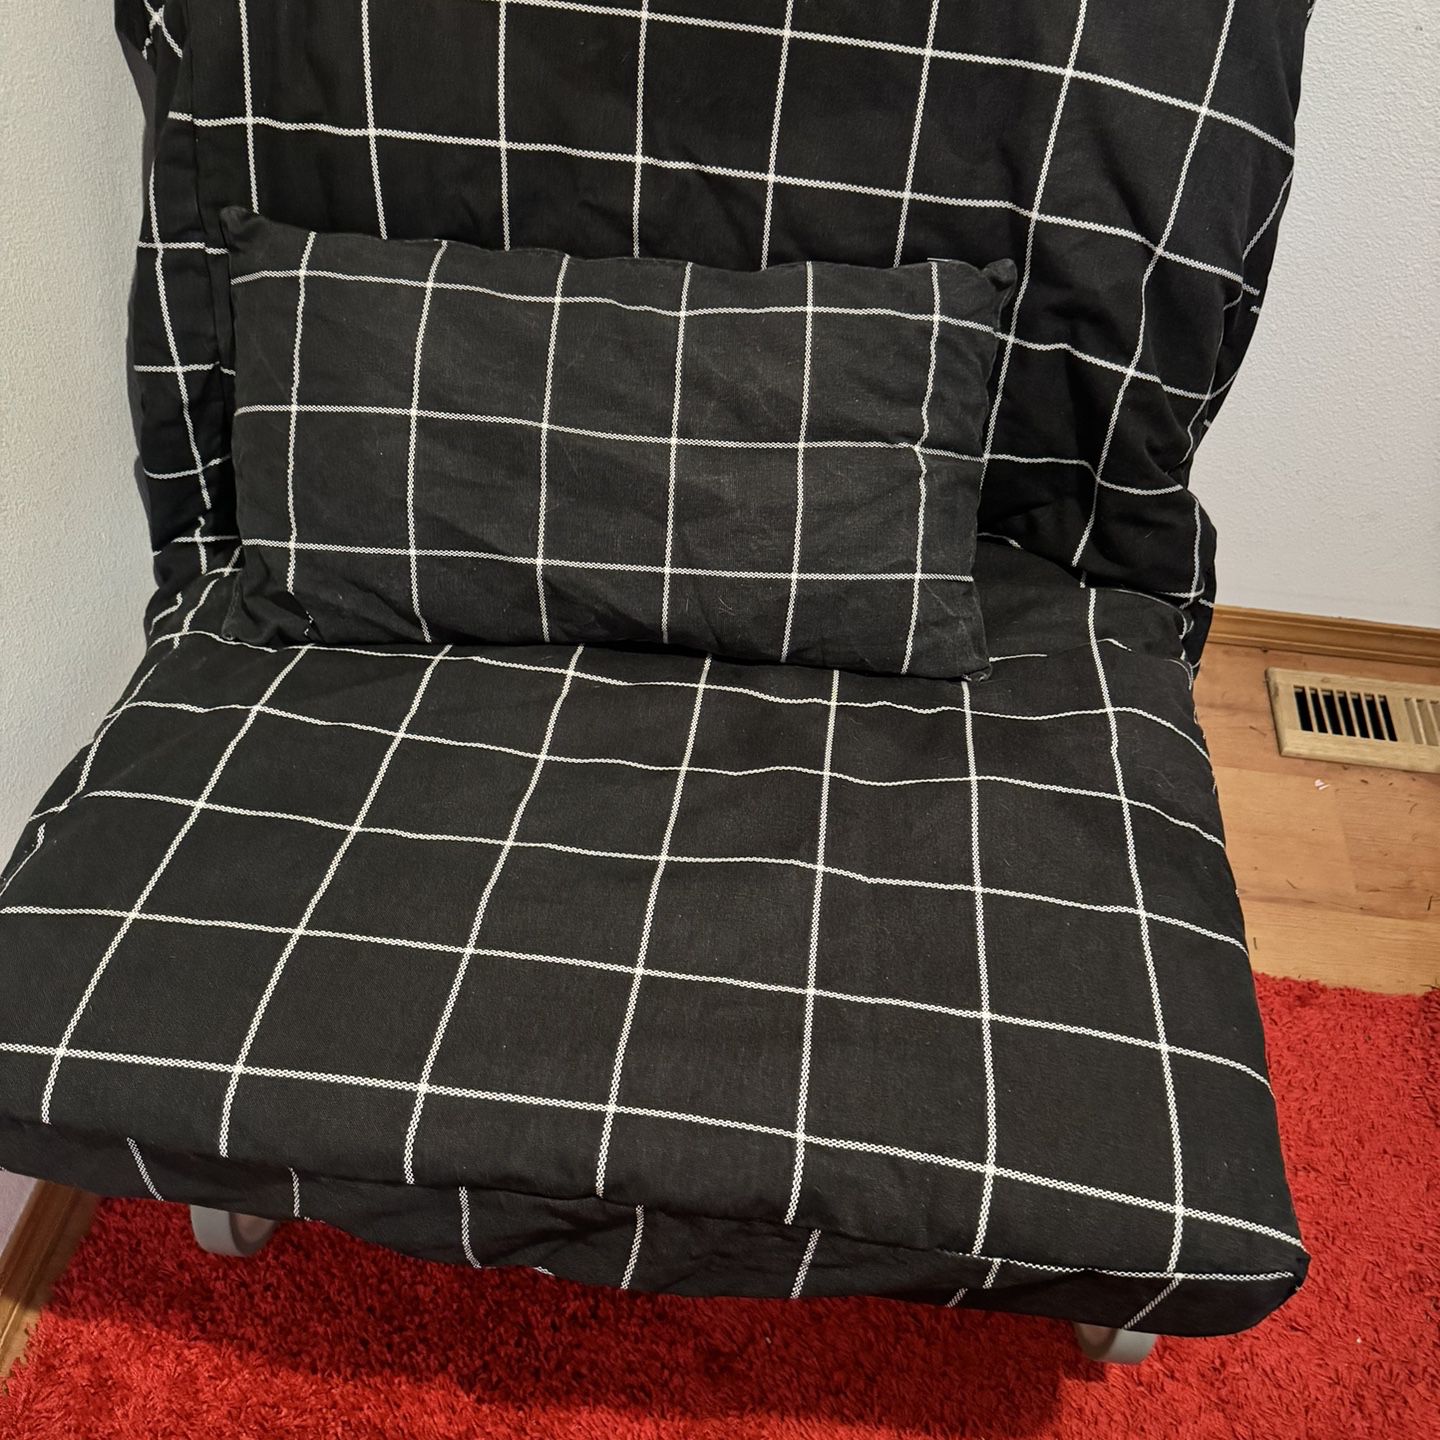 IKEA Convertible Chair/bed